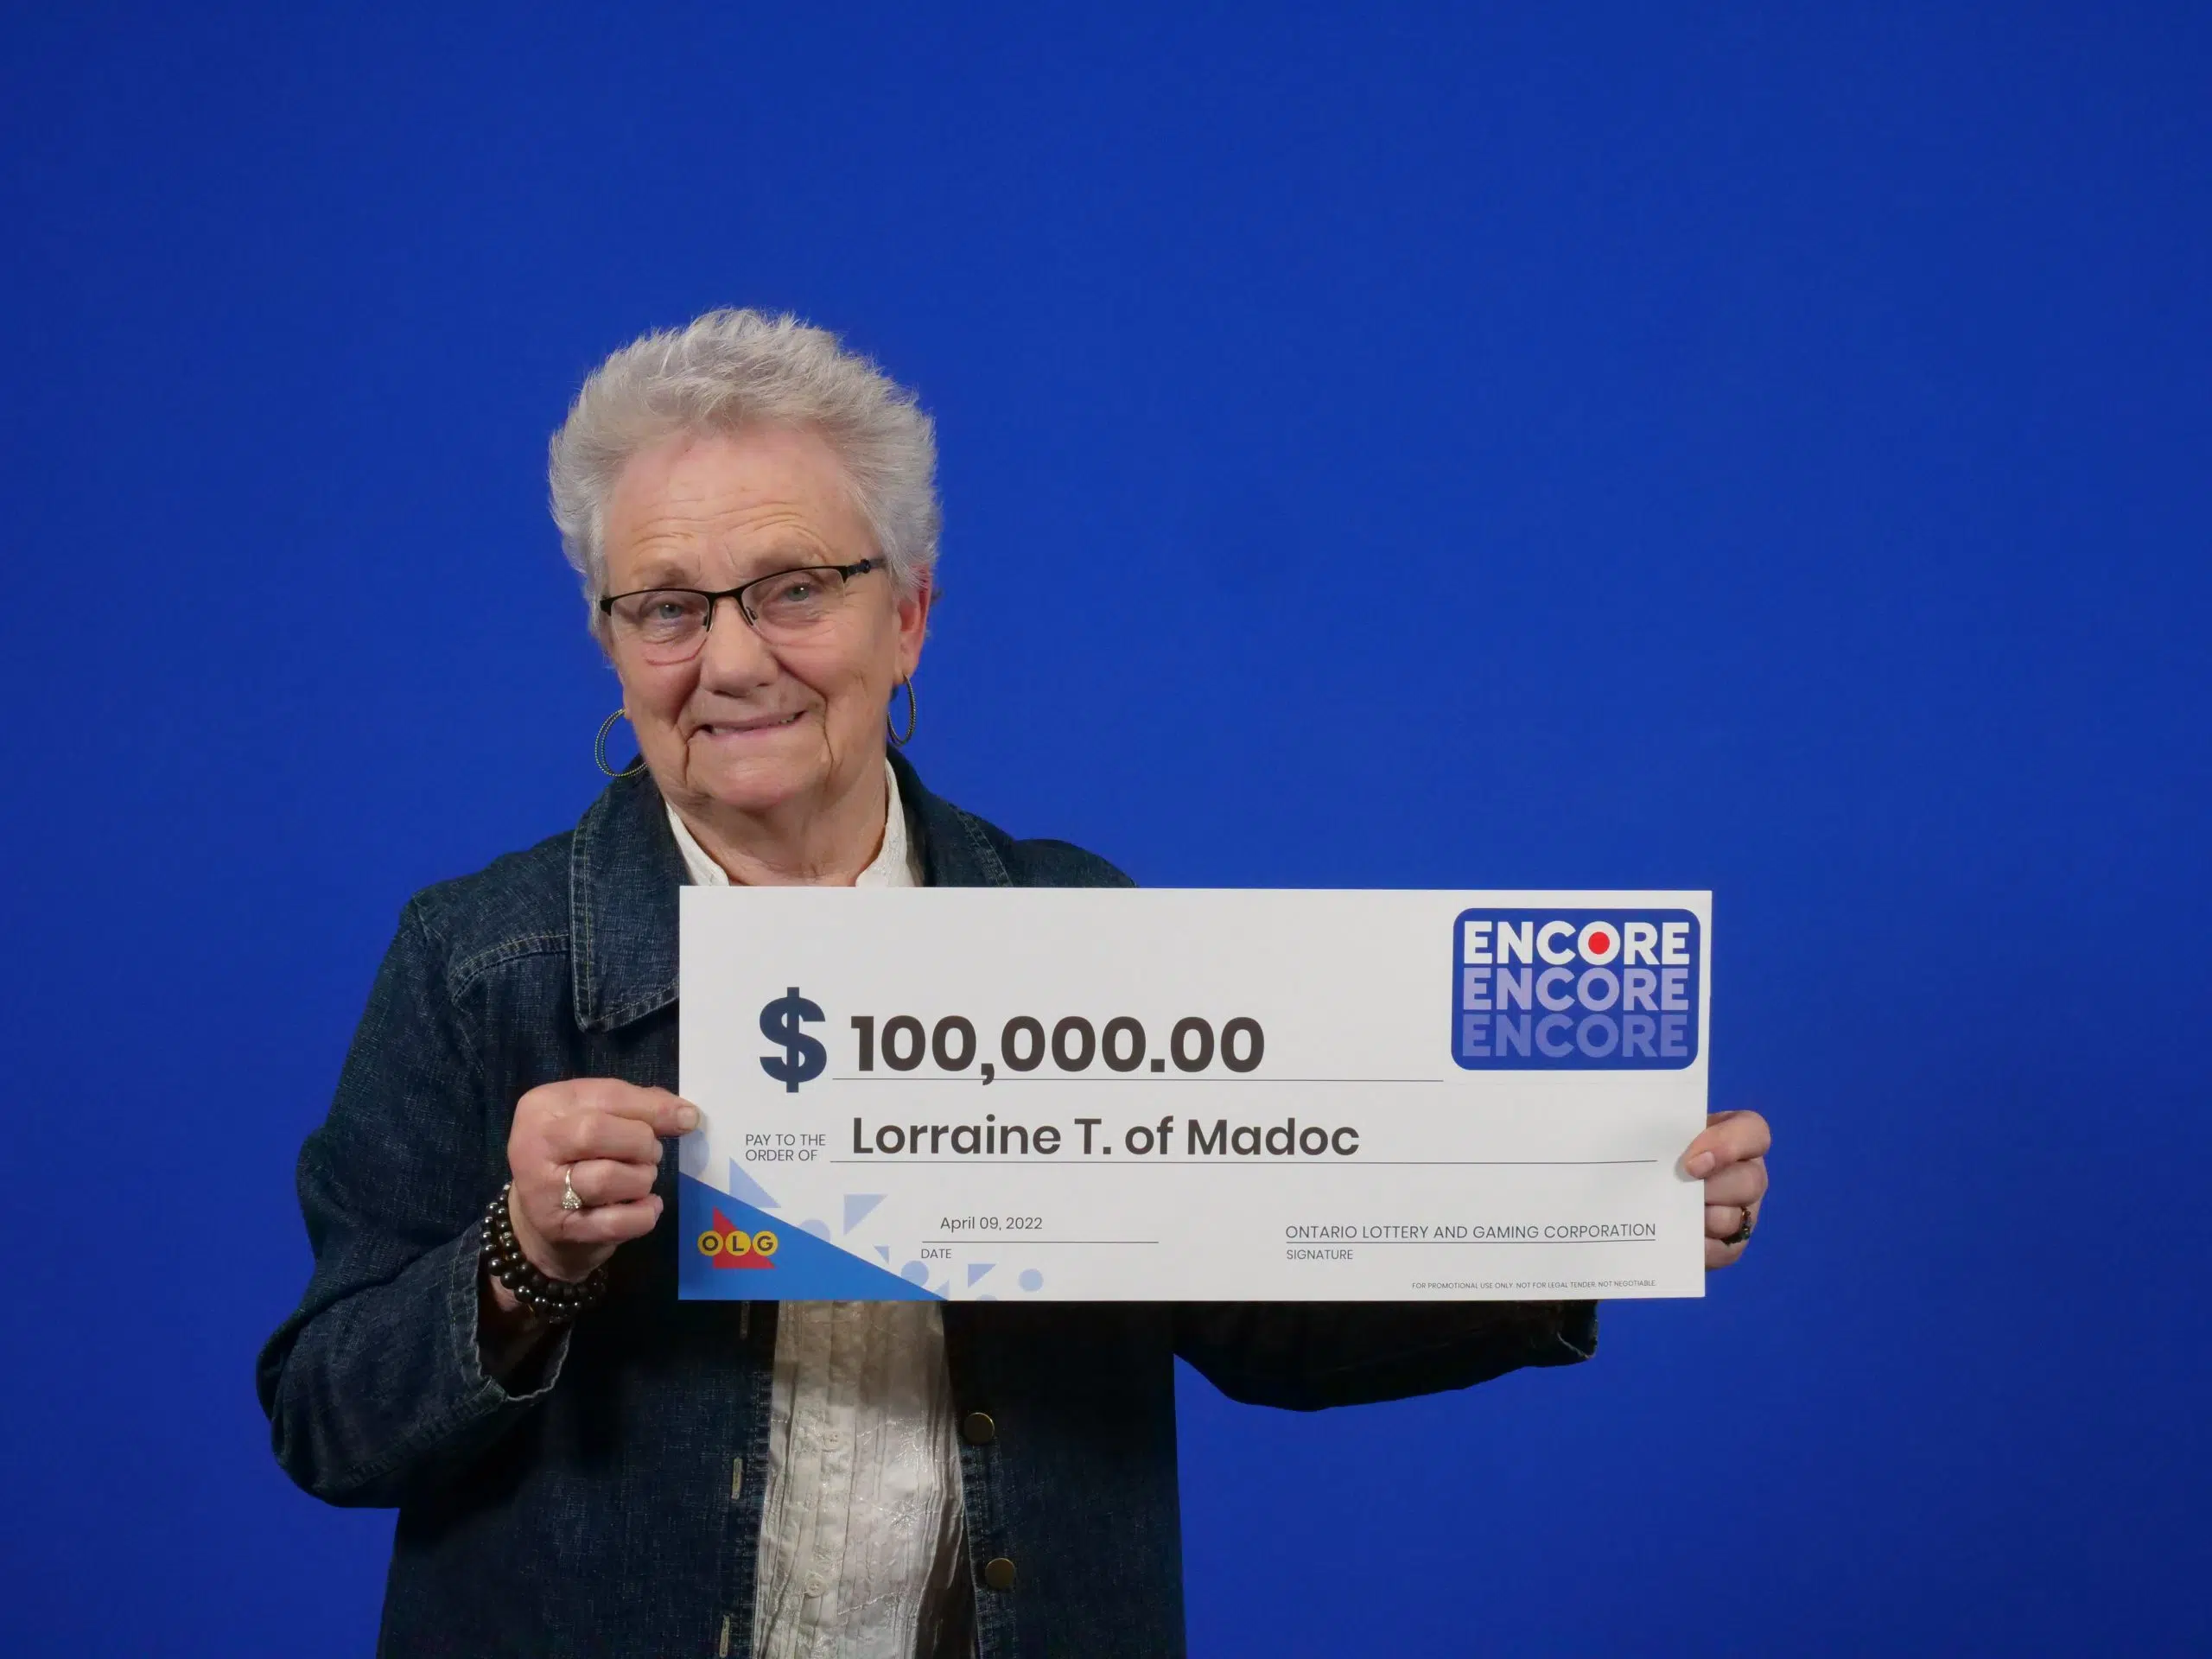 Encore purchase nets $100,000 for Madoc resident